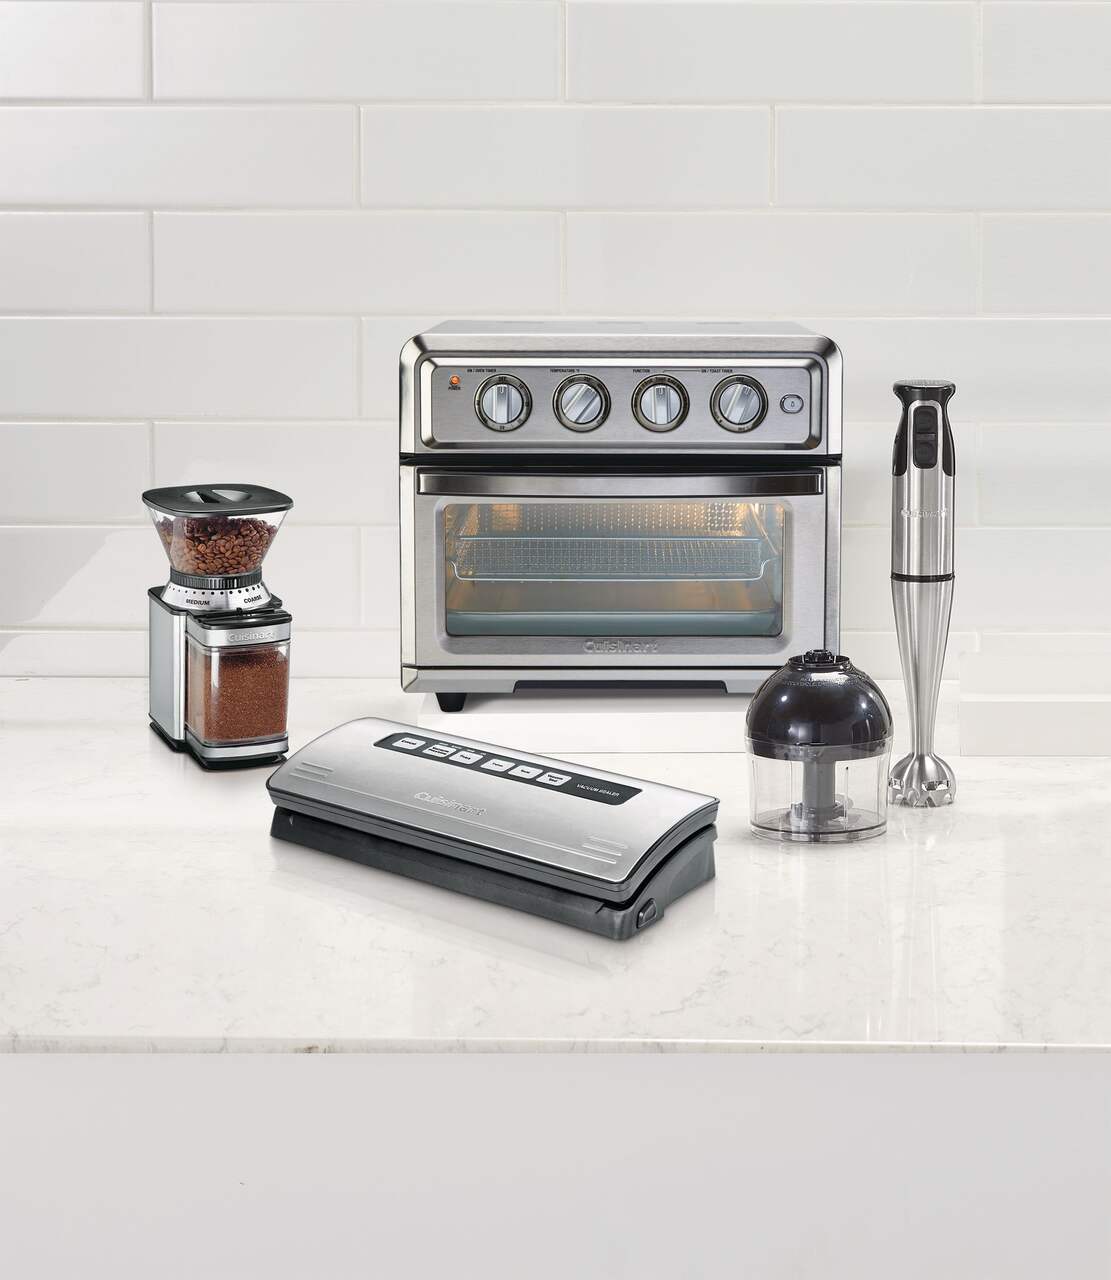 https://media-www.canadiantire.ca/product/living/kitchen/kitchen-appliances/0432116/cuisinart-griddler-0f7f0569-a021-4927-b666-0b28b4e8729b-jpgrendition.jpg?imdensity=1&imwidth=1244&impolicy=mZoom